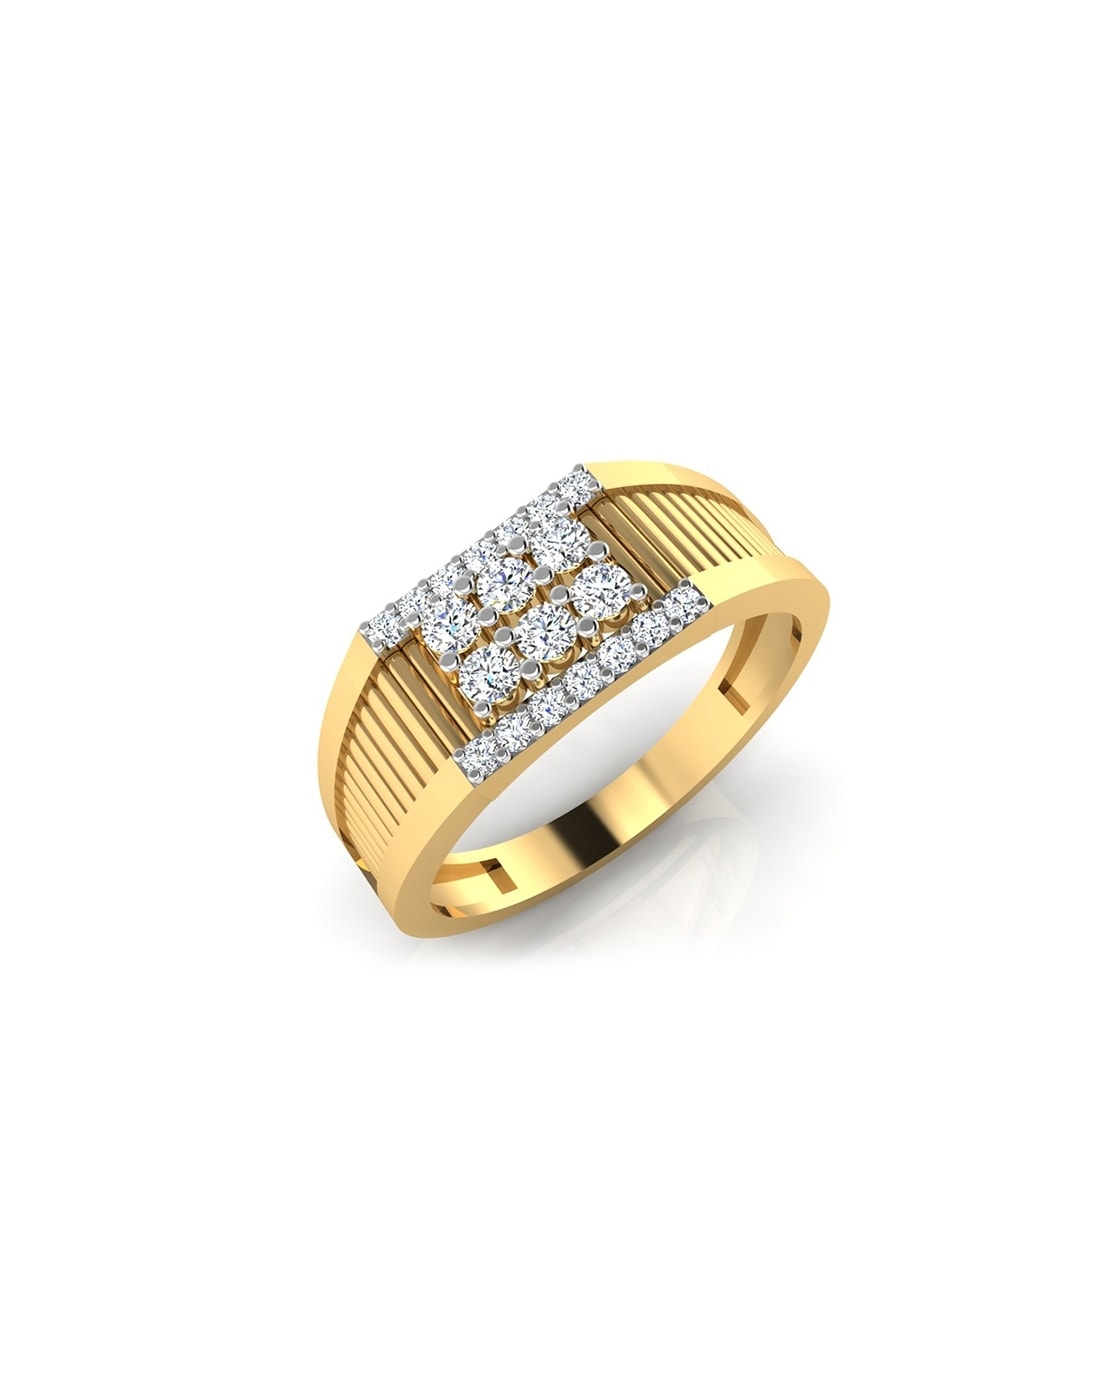 Latest Designs & Collections of Finger Rings | Senco Gold